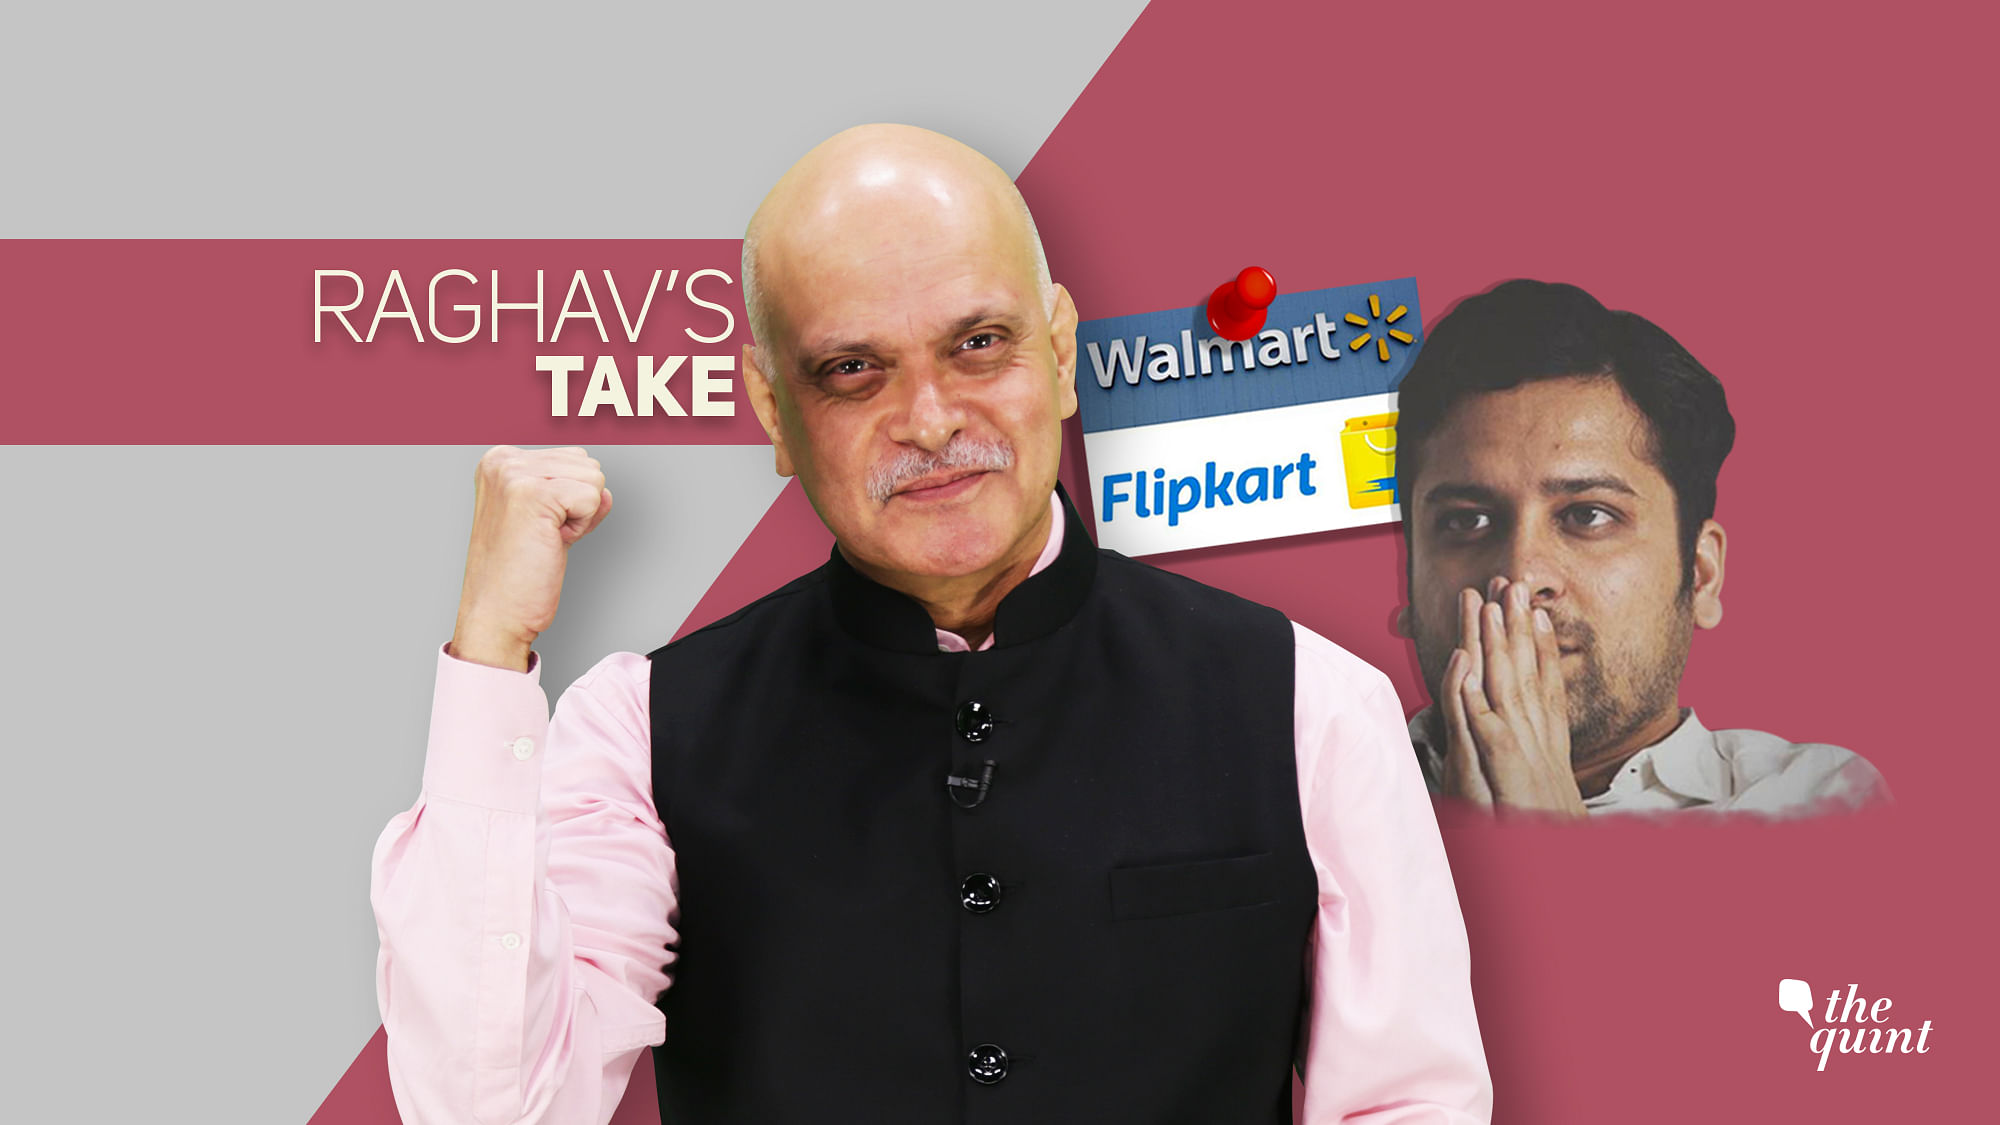 “First generation investors should refuse to become their buyer’s CEO,” argues Raghav Bahl.